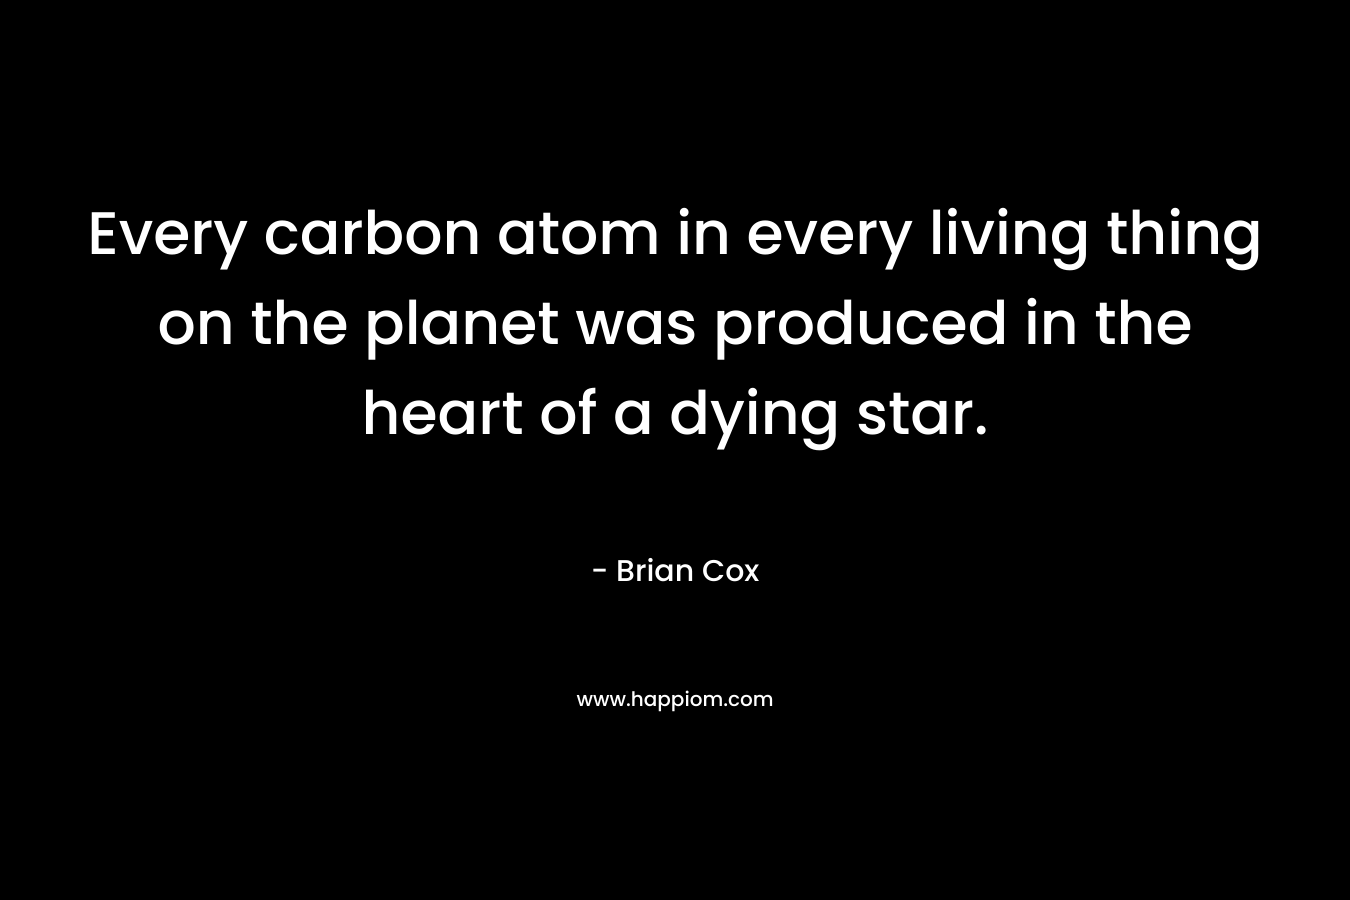 Every carbon atom in every living thing on the planet was produced in the heart of a dying star. – Brian Cox